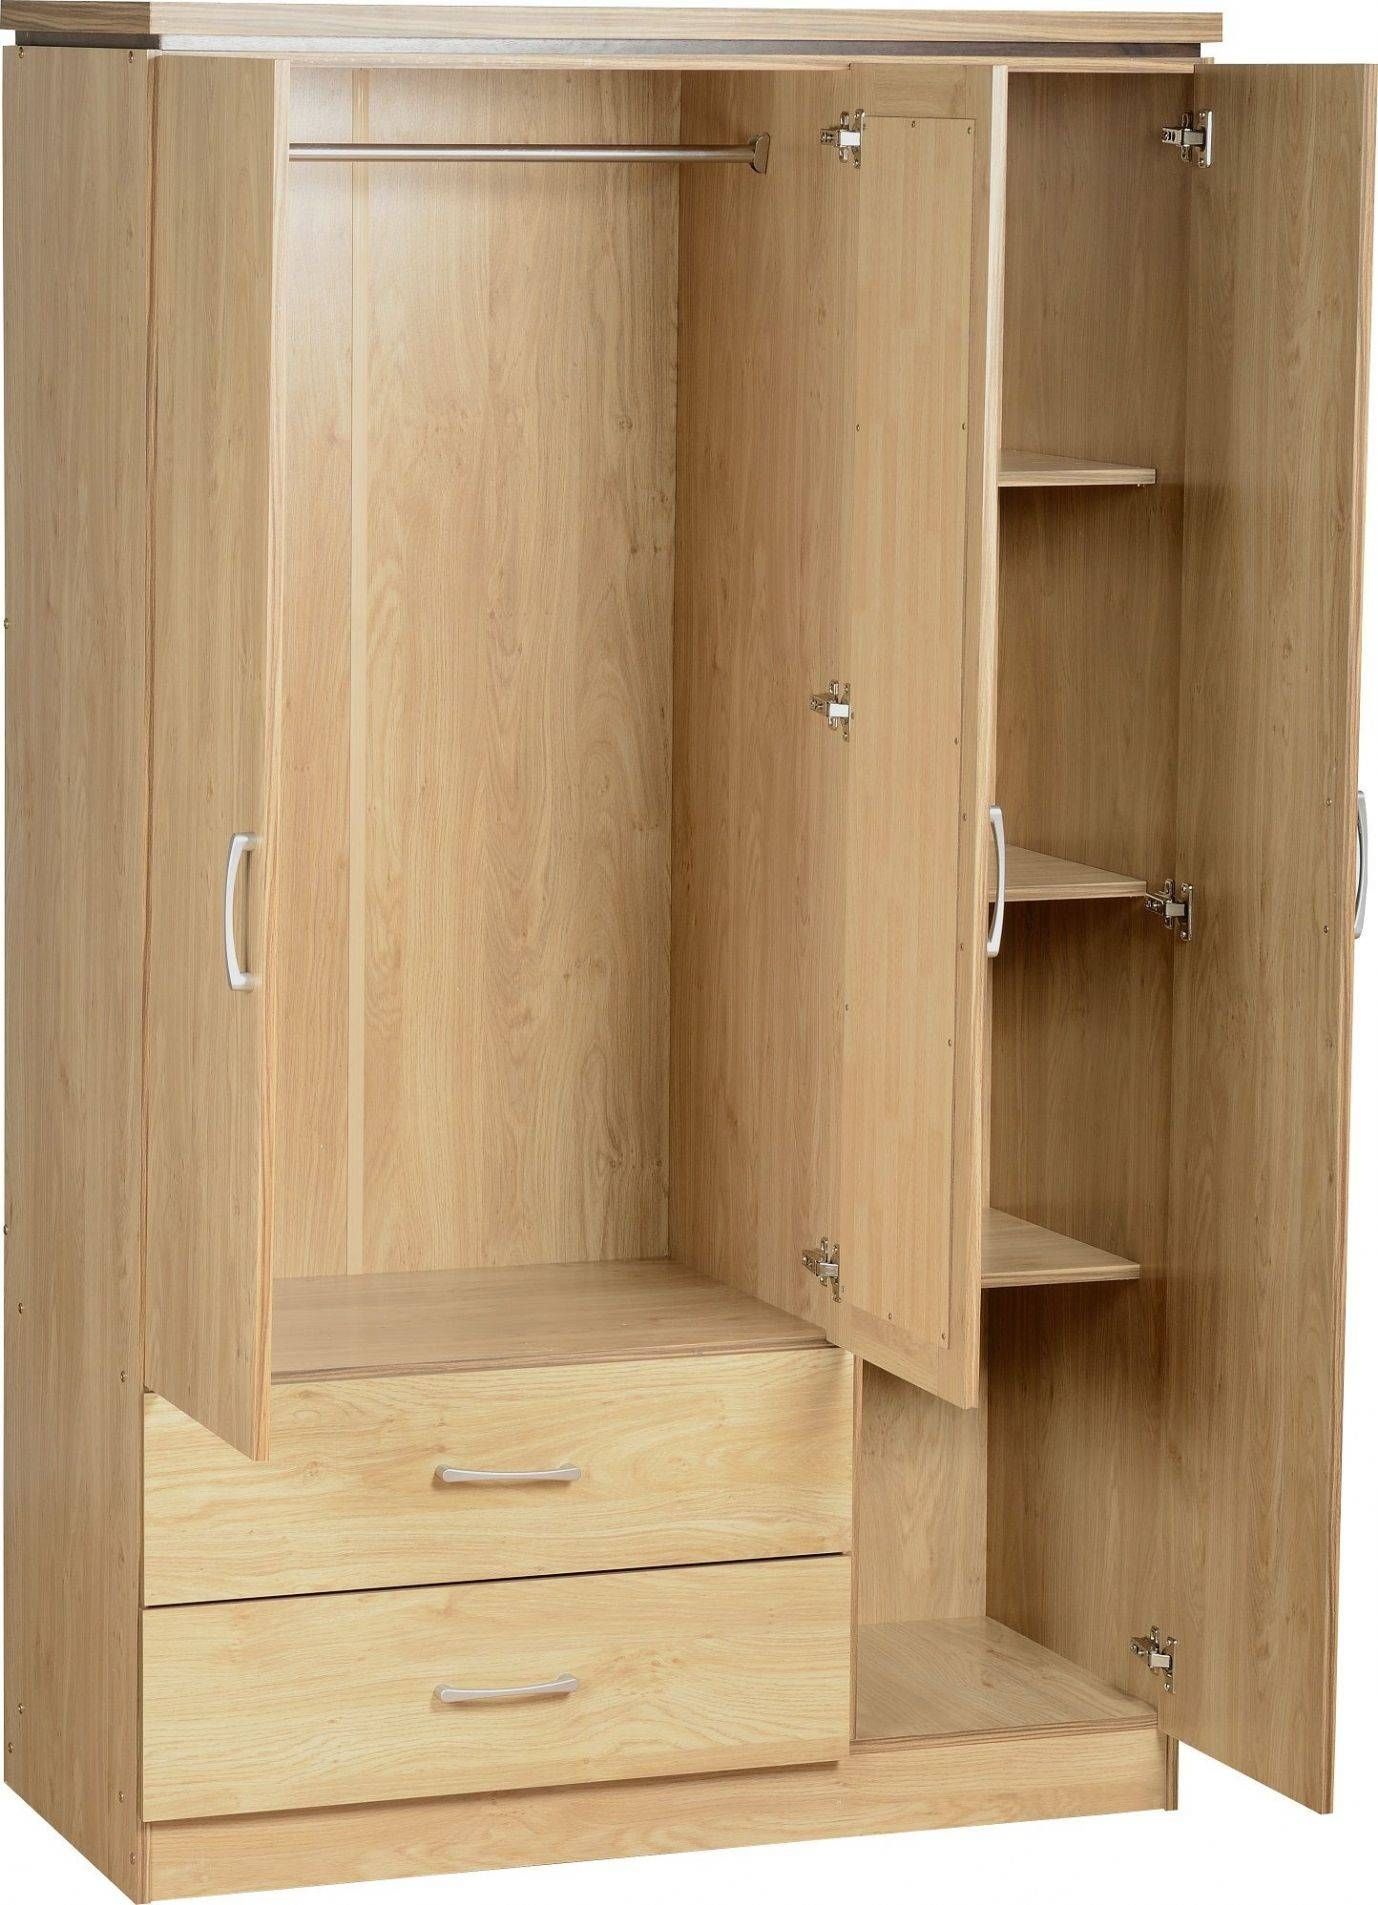 Wardrobes With Shelves, Ca Baumhaus Amelie Oak Childrens Kids Pertaining To 3 Door Wardrobe With Drawers And Shelves (View 1 of 30)